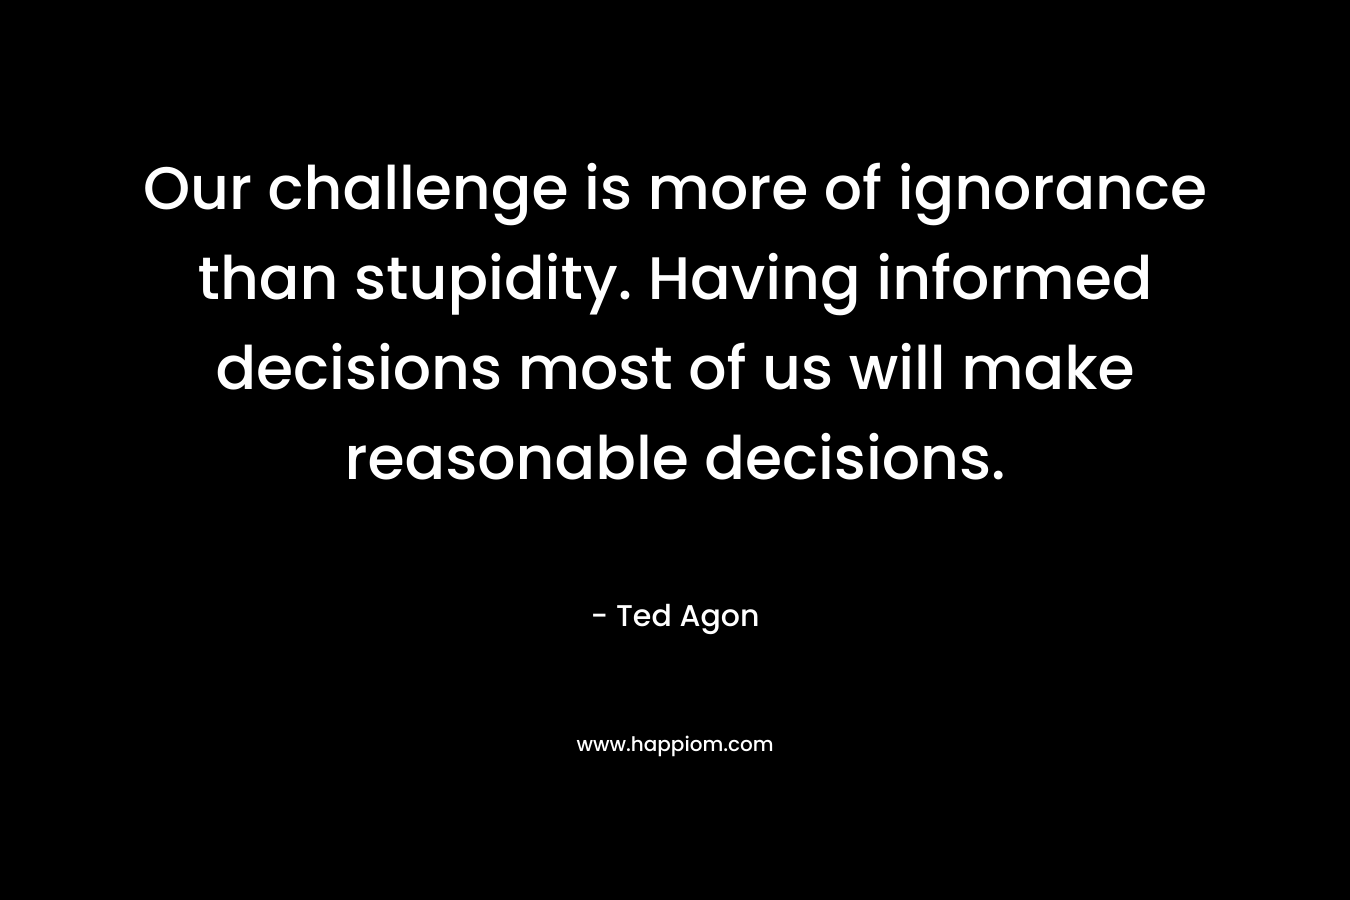 Our challenge is more of ignorance than stupidity. Having informed decisions most of us will make reasonable decisions.